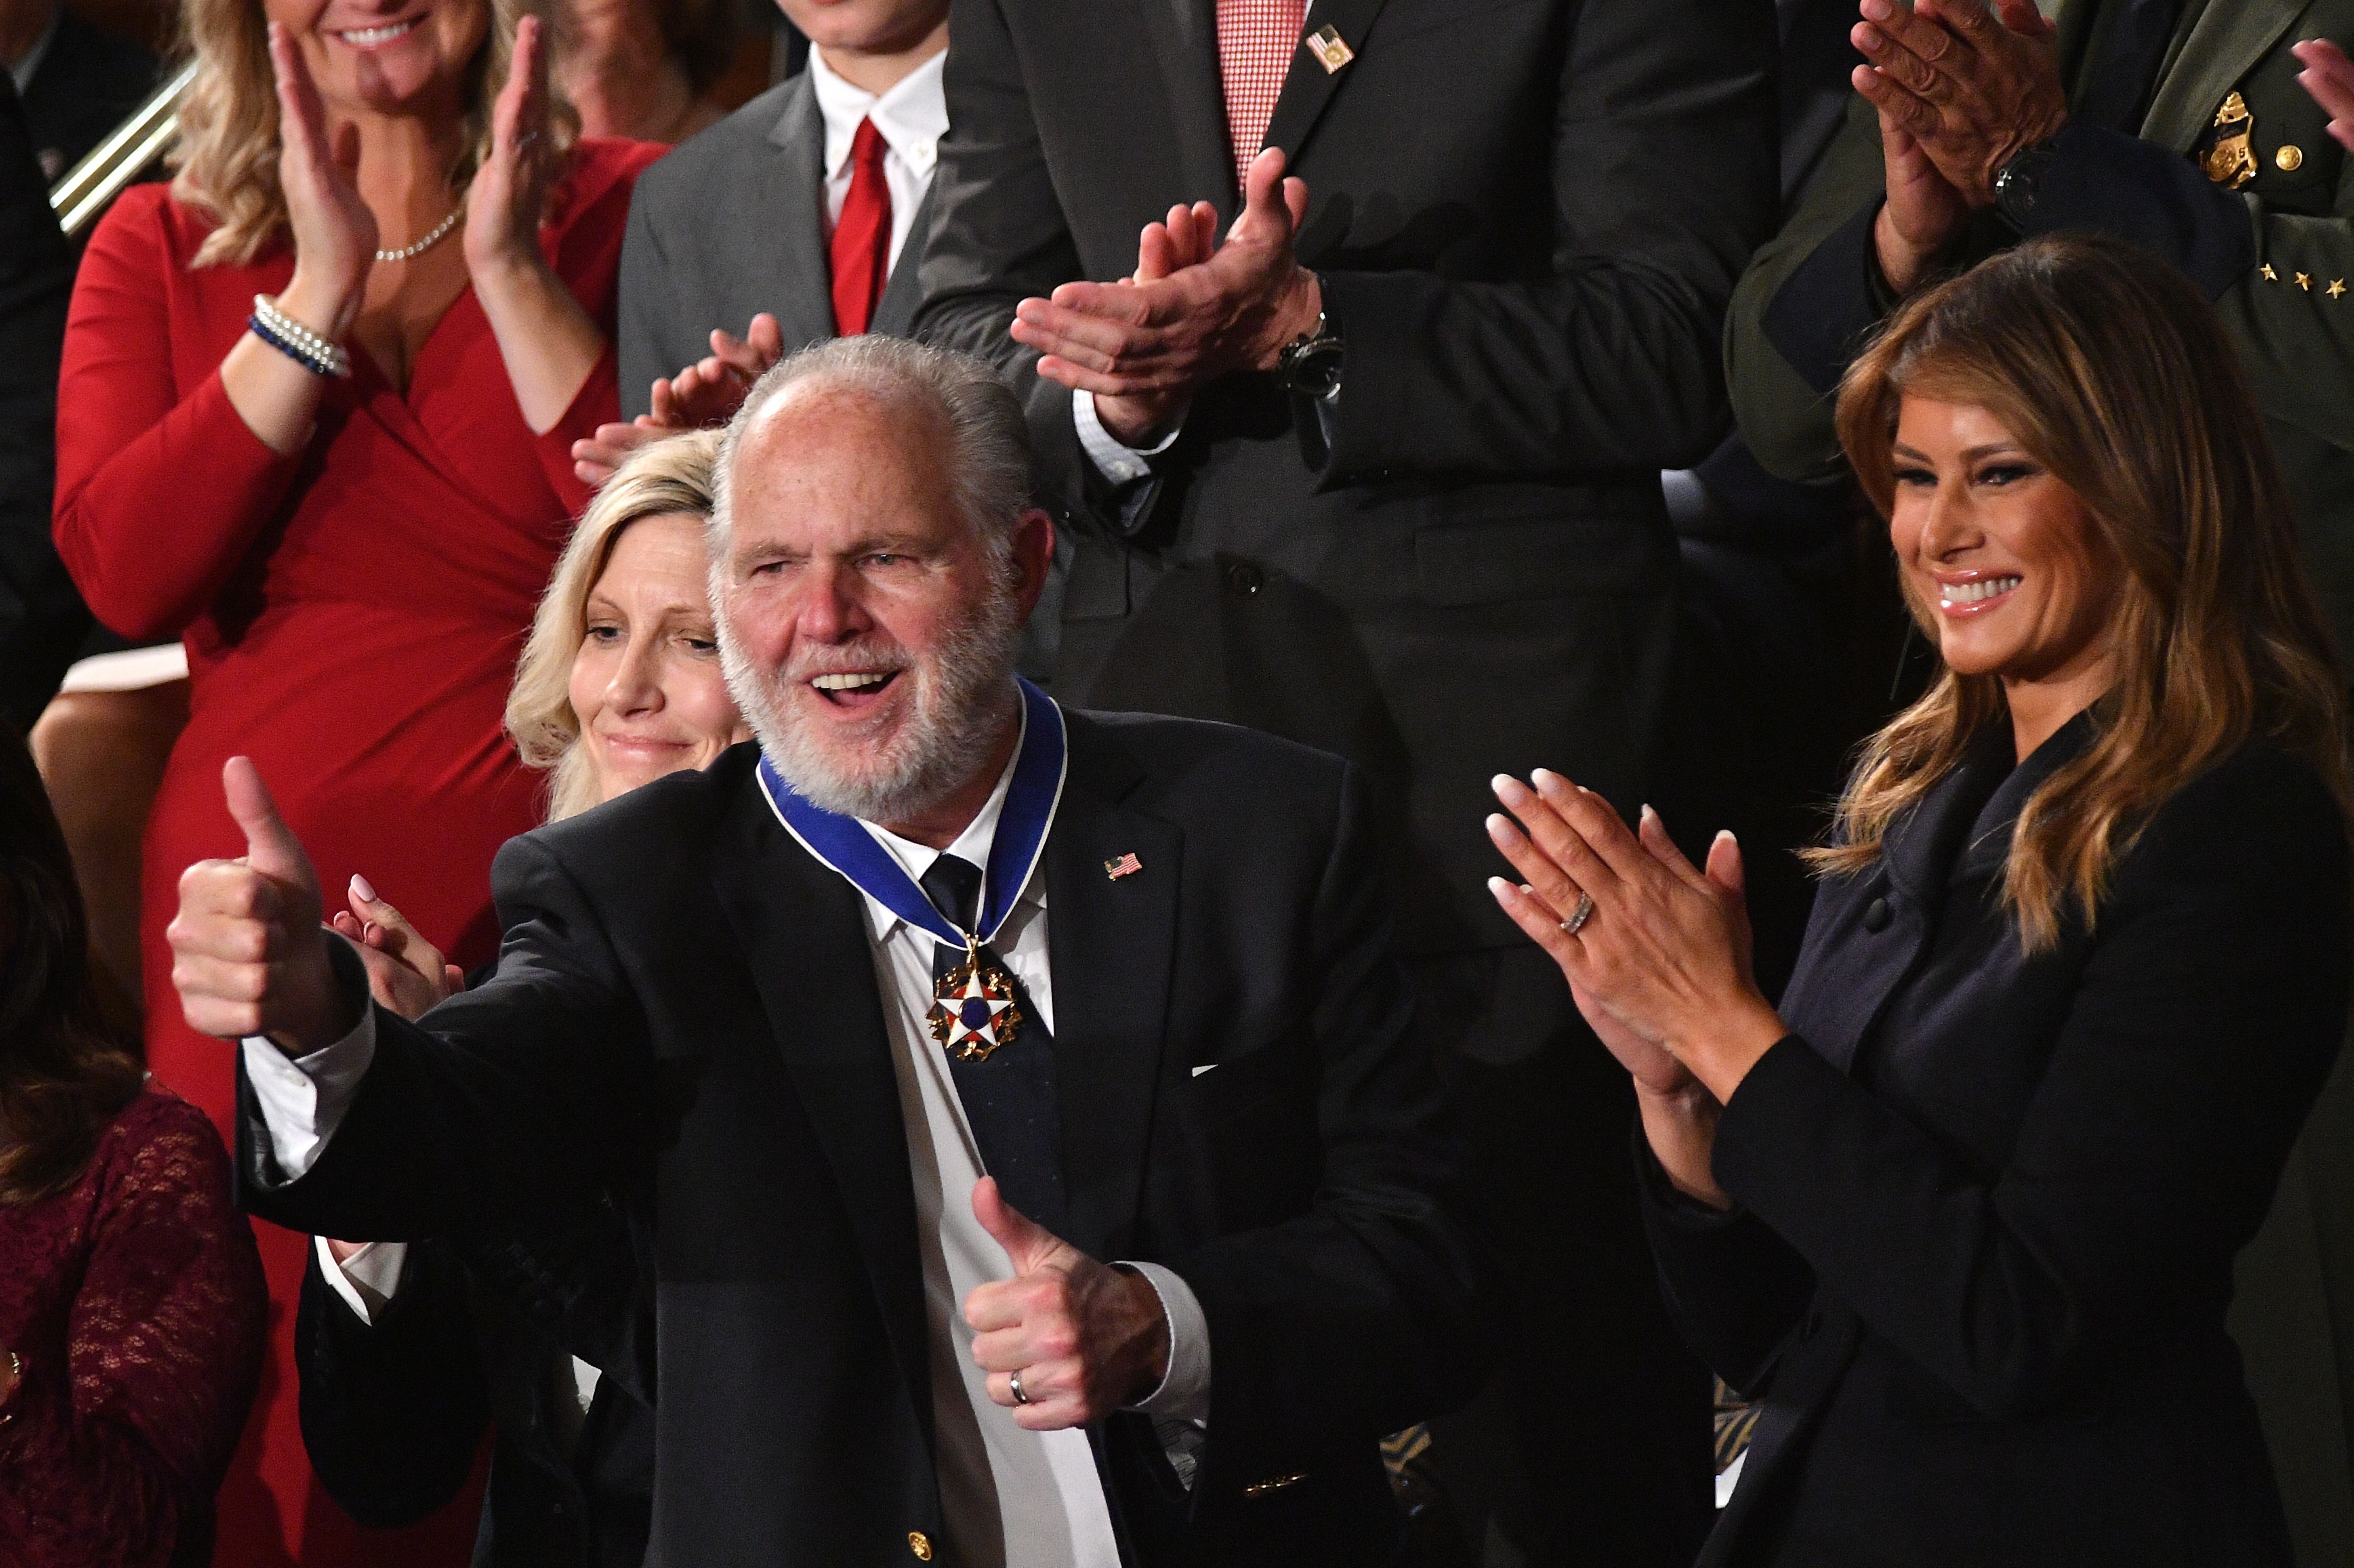 Radio personality Rush Limbaugh pumps thumb after being awarded the Medal of Freedom by First Lady Melania Trump after being acknowledged by US President Donald Trump